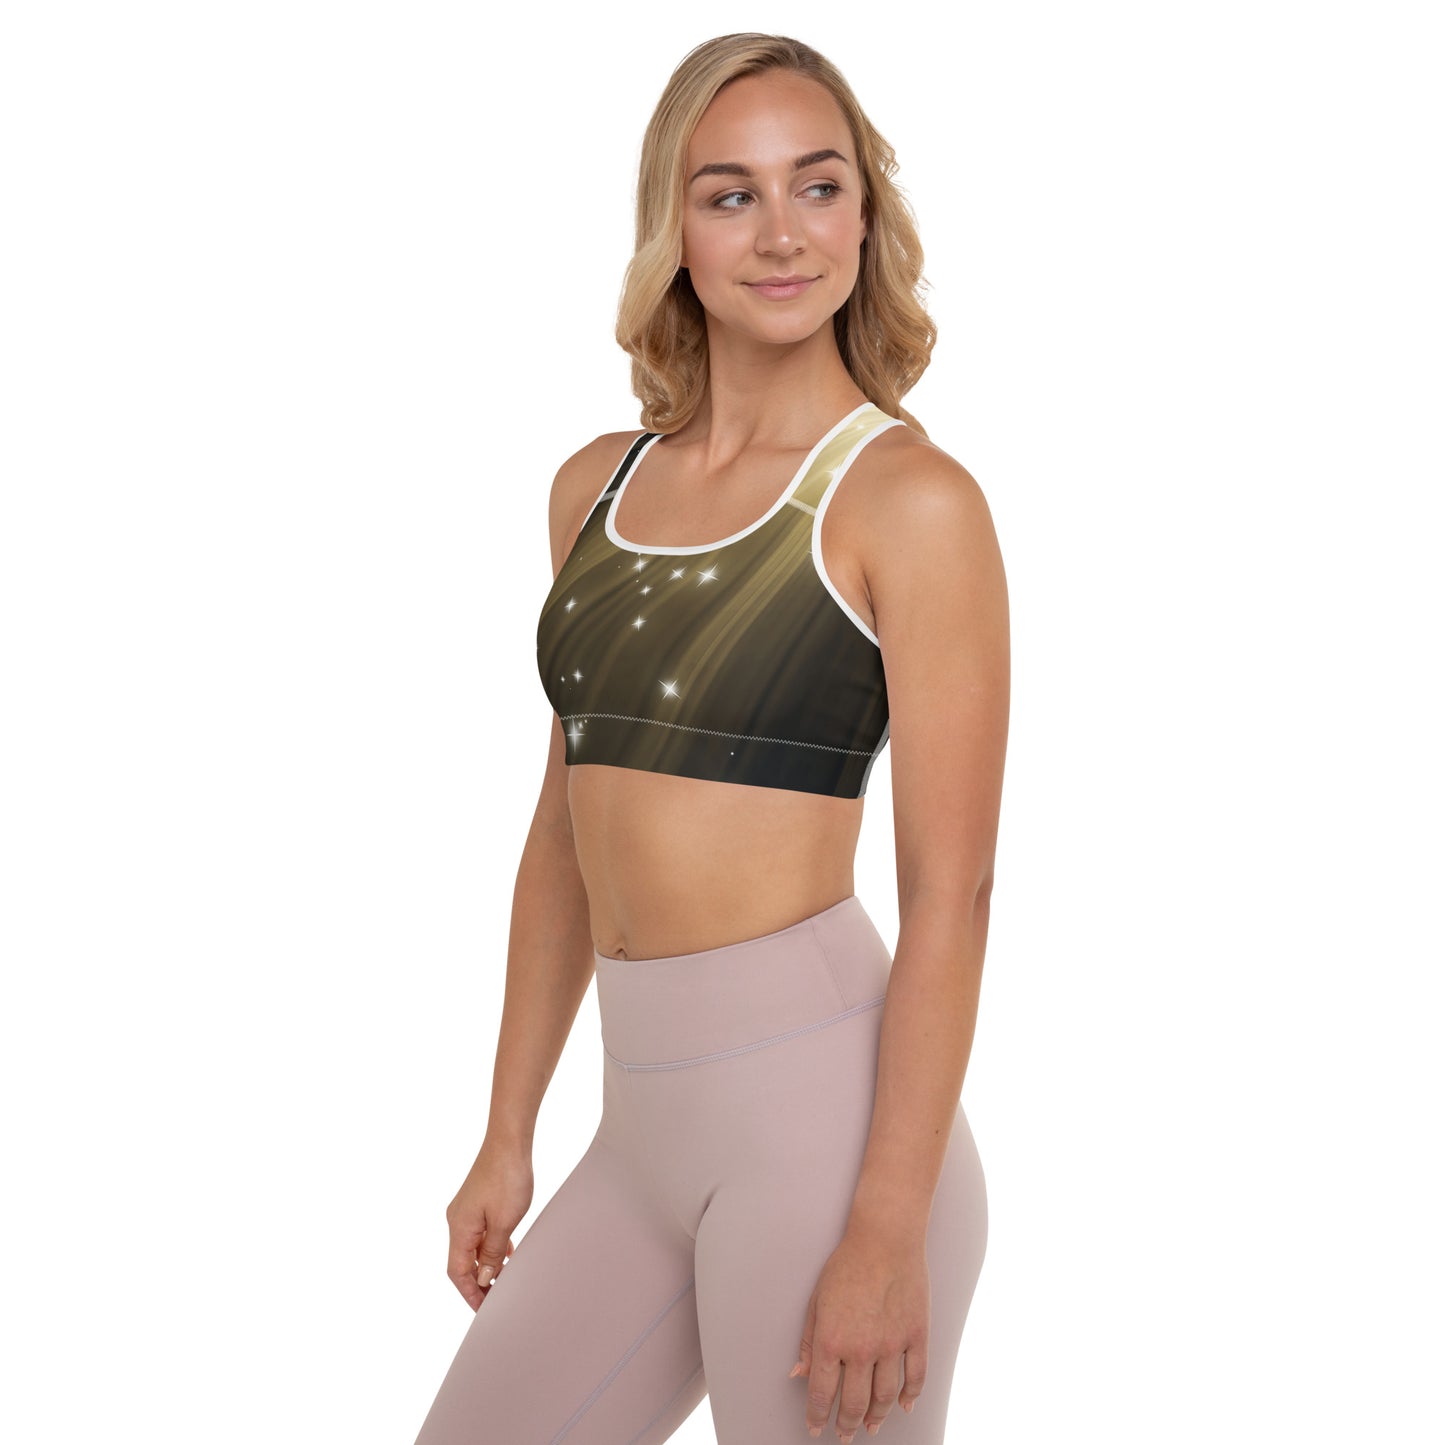 Female artist shine bright rocking your Gold Spotlyght Padded Sports Bra